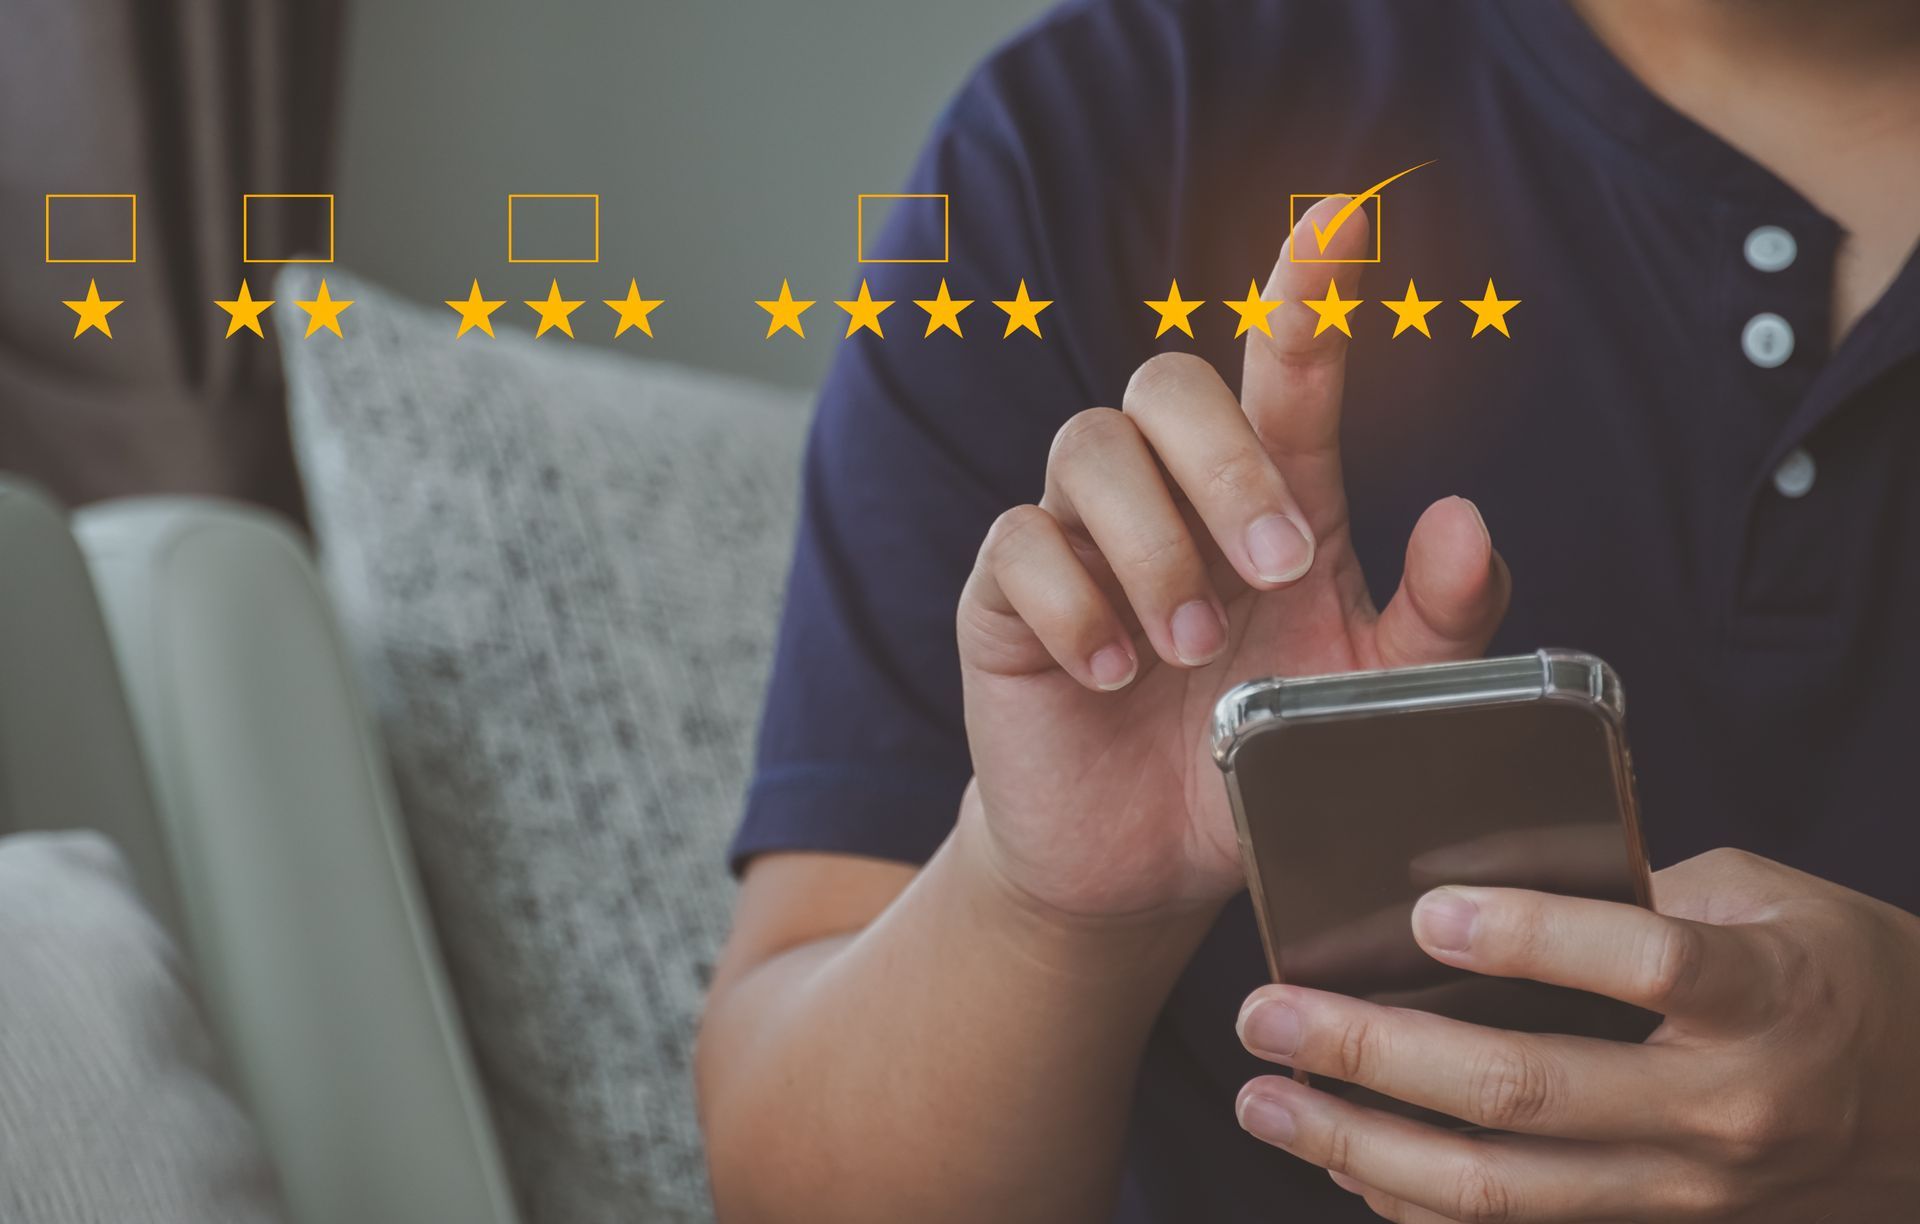 Patient clicking on 5-star review